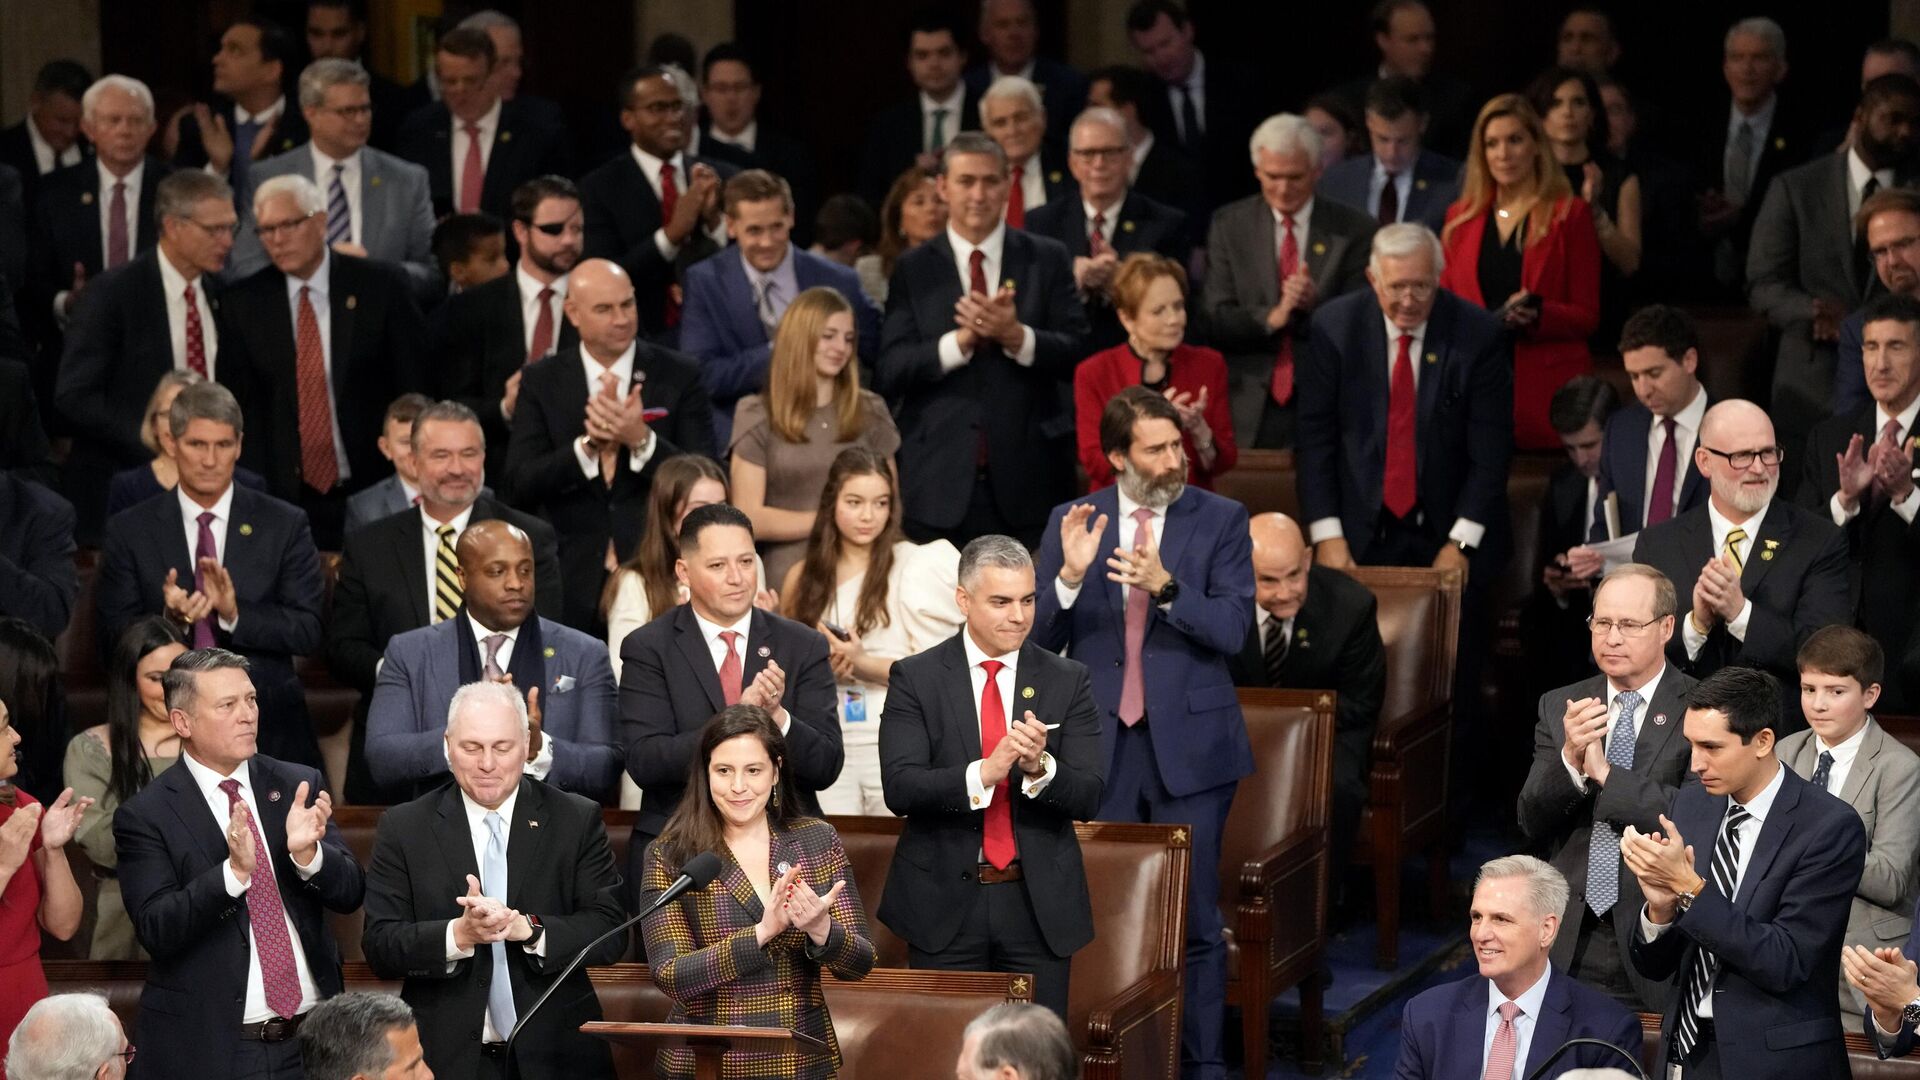 House Republican Leader Kevin McCarthy, R-Calif., bottom right, is applauded after he was nominated to be the new Speaker of the House by Rep. Elise Stefanik, R-N.Y., in the House chamber on the opening day of the 118th Congress at the U.S. Capitol, Tuesday, Jan. 3, 2023, in Washington. - Sputnik International, 1920, 15.09.2023